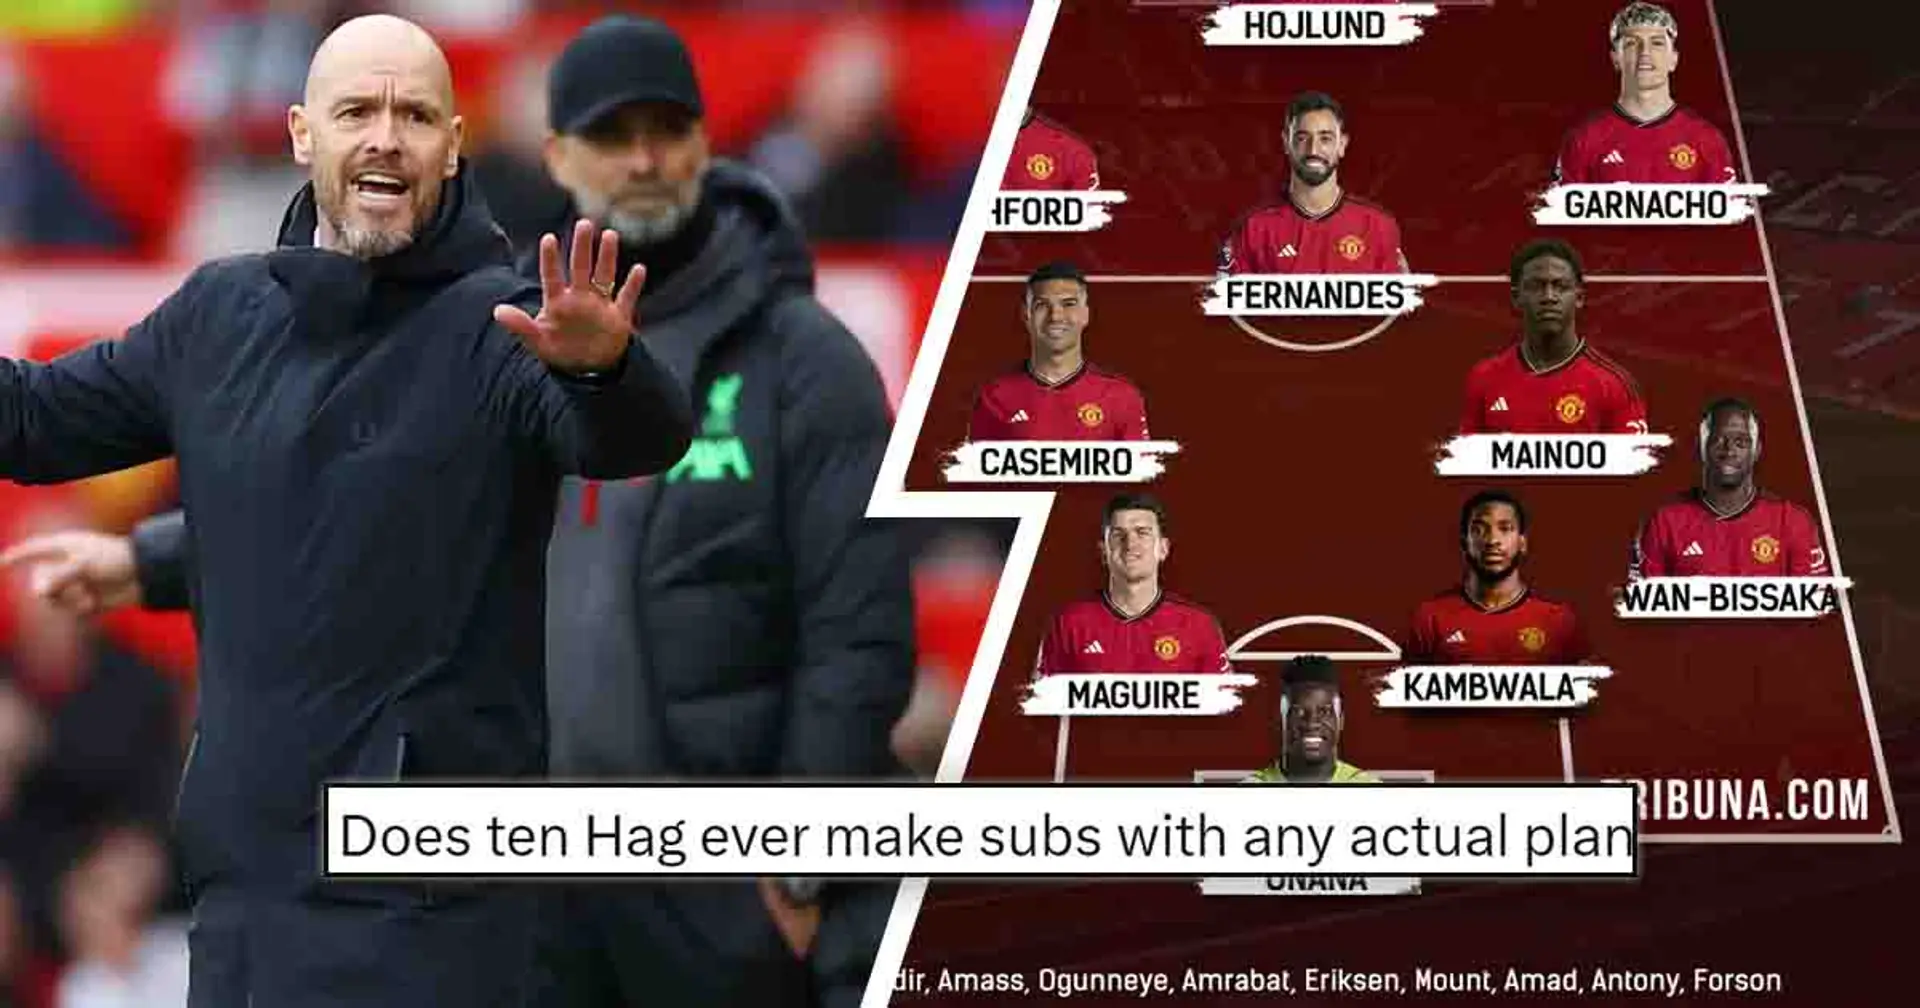 'Made a terrible call': Some Man United fans cite Ten Hag's tactical change that ended chances of defeating Liverpool